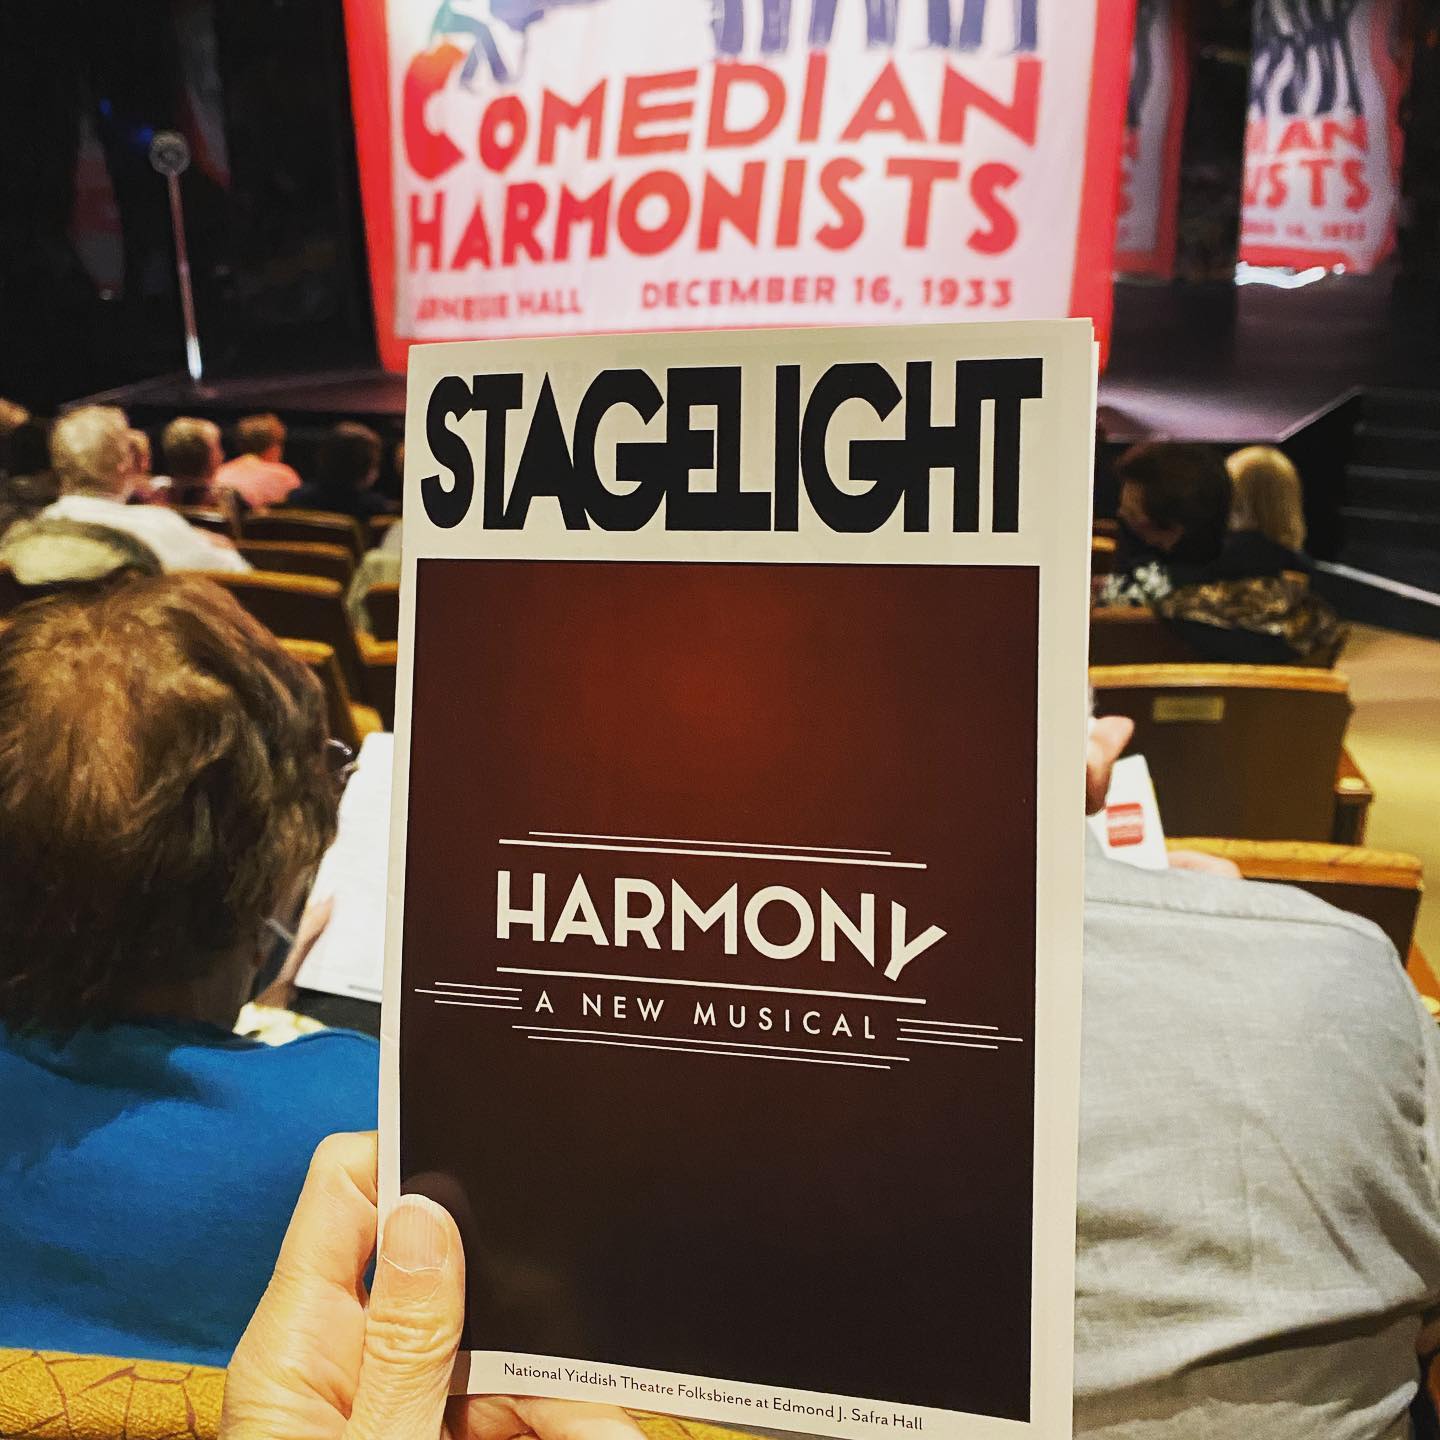 So, so happy to get a rush ticket to this show today.  Harmony is delightful and sobering. It is beautifully written by @barrymanilowofficial and @brucehsussman and performed to perfection by @thecastofharmony This true story of a singing group in 1930s Germany felt startlingly relevant. It triggered my fears for our humanity, while at the same time reassuring my faith in it. It is so good ❤️#nationalyiddishtheatrefolksbiene #jewishheritagemuseumnyc #offbroadway #offbroadwaymusical #musicaltheatre #bookmusical #ilovenusicals #ilovemusicaltheatre #ilovetheatre #barrymanilow #brucesussman #warrencarlyle #chipzien